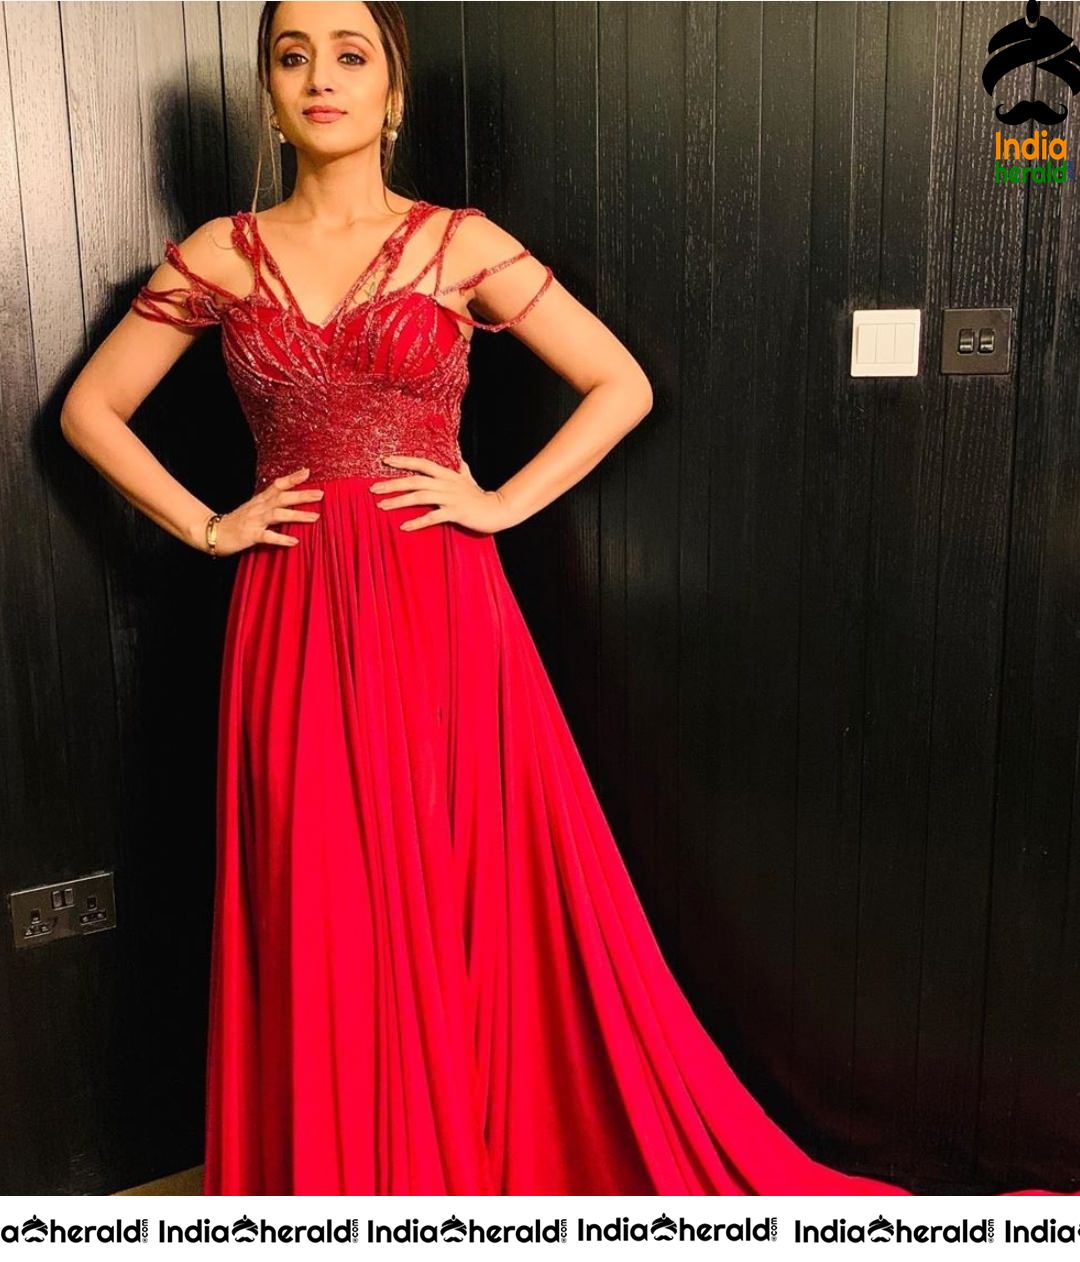 Trisha Looking Red Hot in these glittering Attire